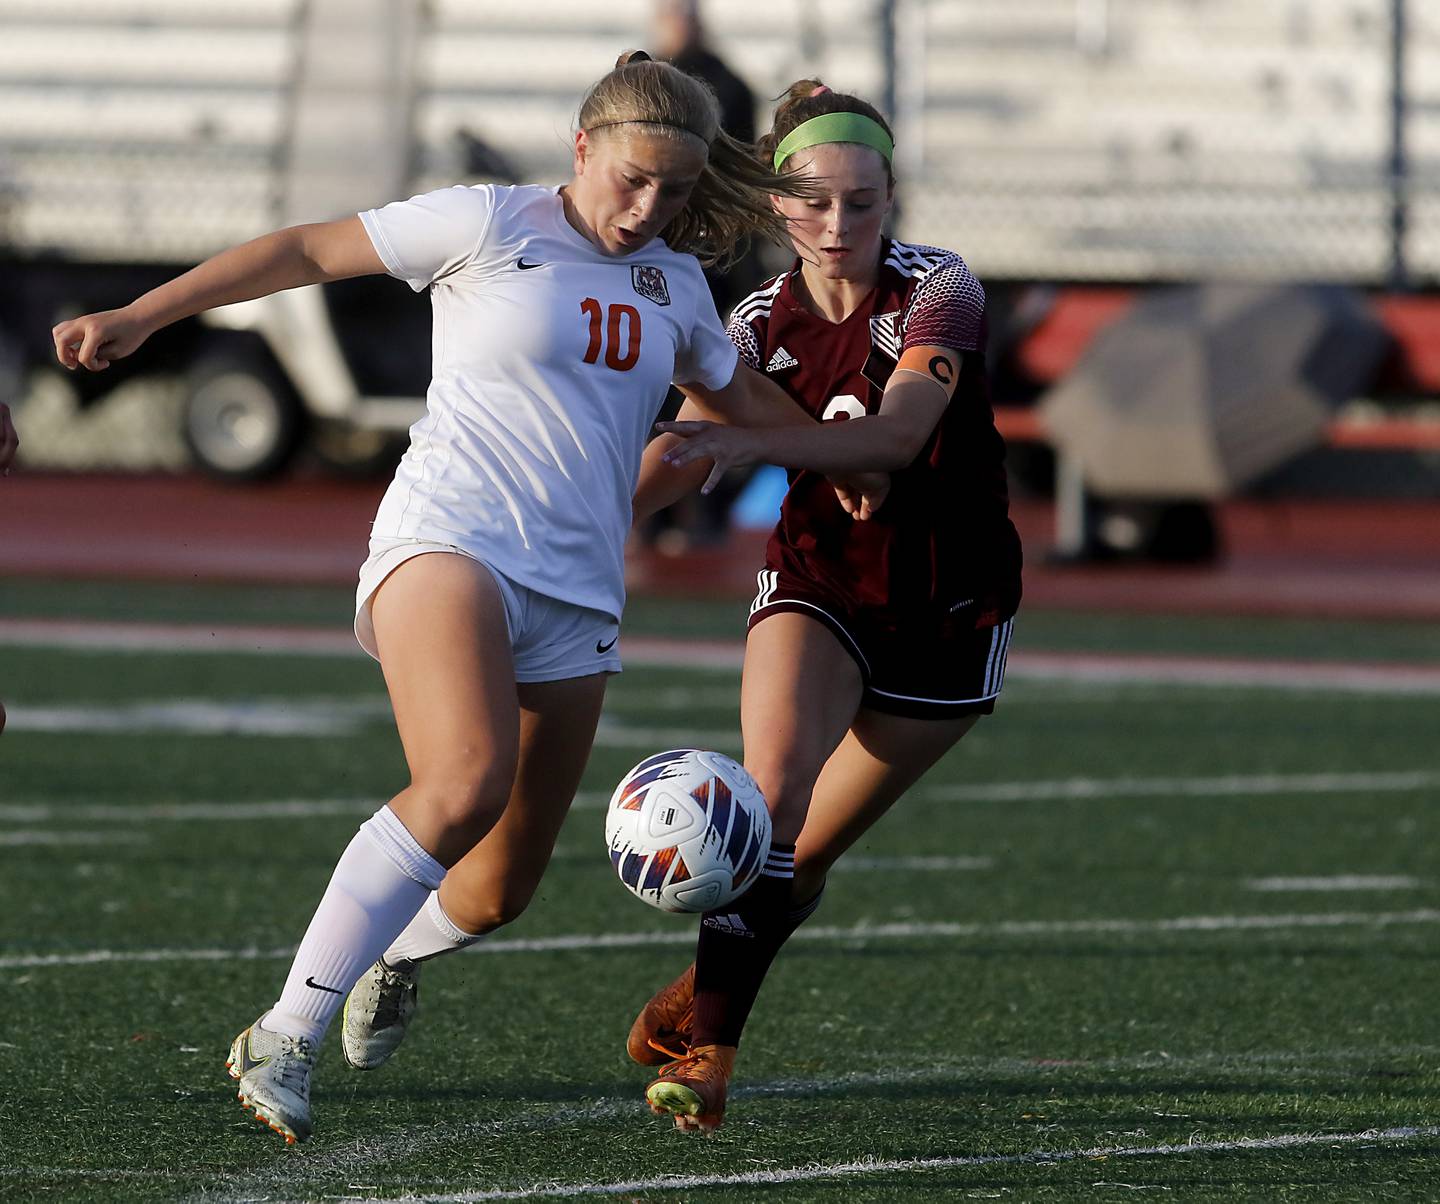 Crystal Lake Central's Brooklynn Carlson controls the ball as she tries to take a shot against St. Ignatius College Prep's Quinn Urquhart during the Class 2A Deerfield Supersectional girls soccer match on Tuesday, May 28, 2024, at Deerfield High School.